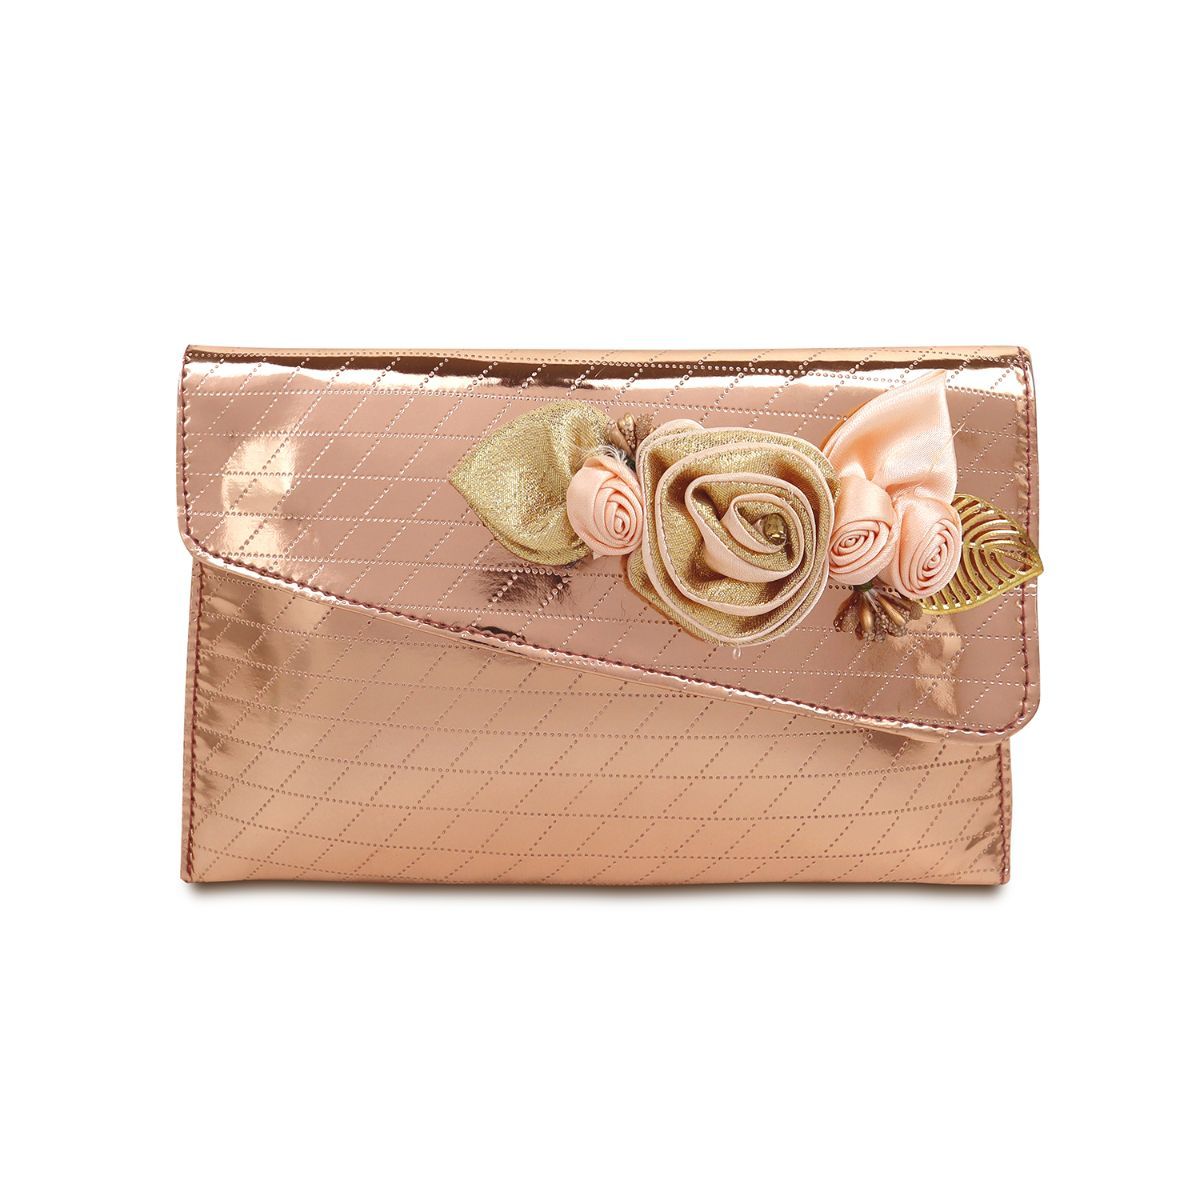 Buy Flower Embroided Designer Evening Party Clutch, Clutch Bag for Women,  Wedding Clutch, Favor Gift Bags, Return Gift for Guests, Online in India -  Etsy